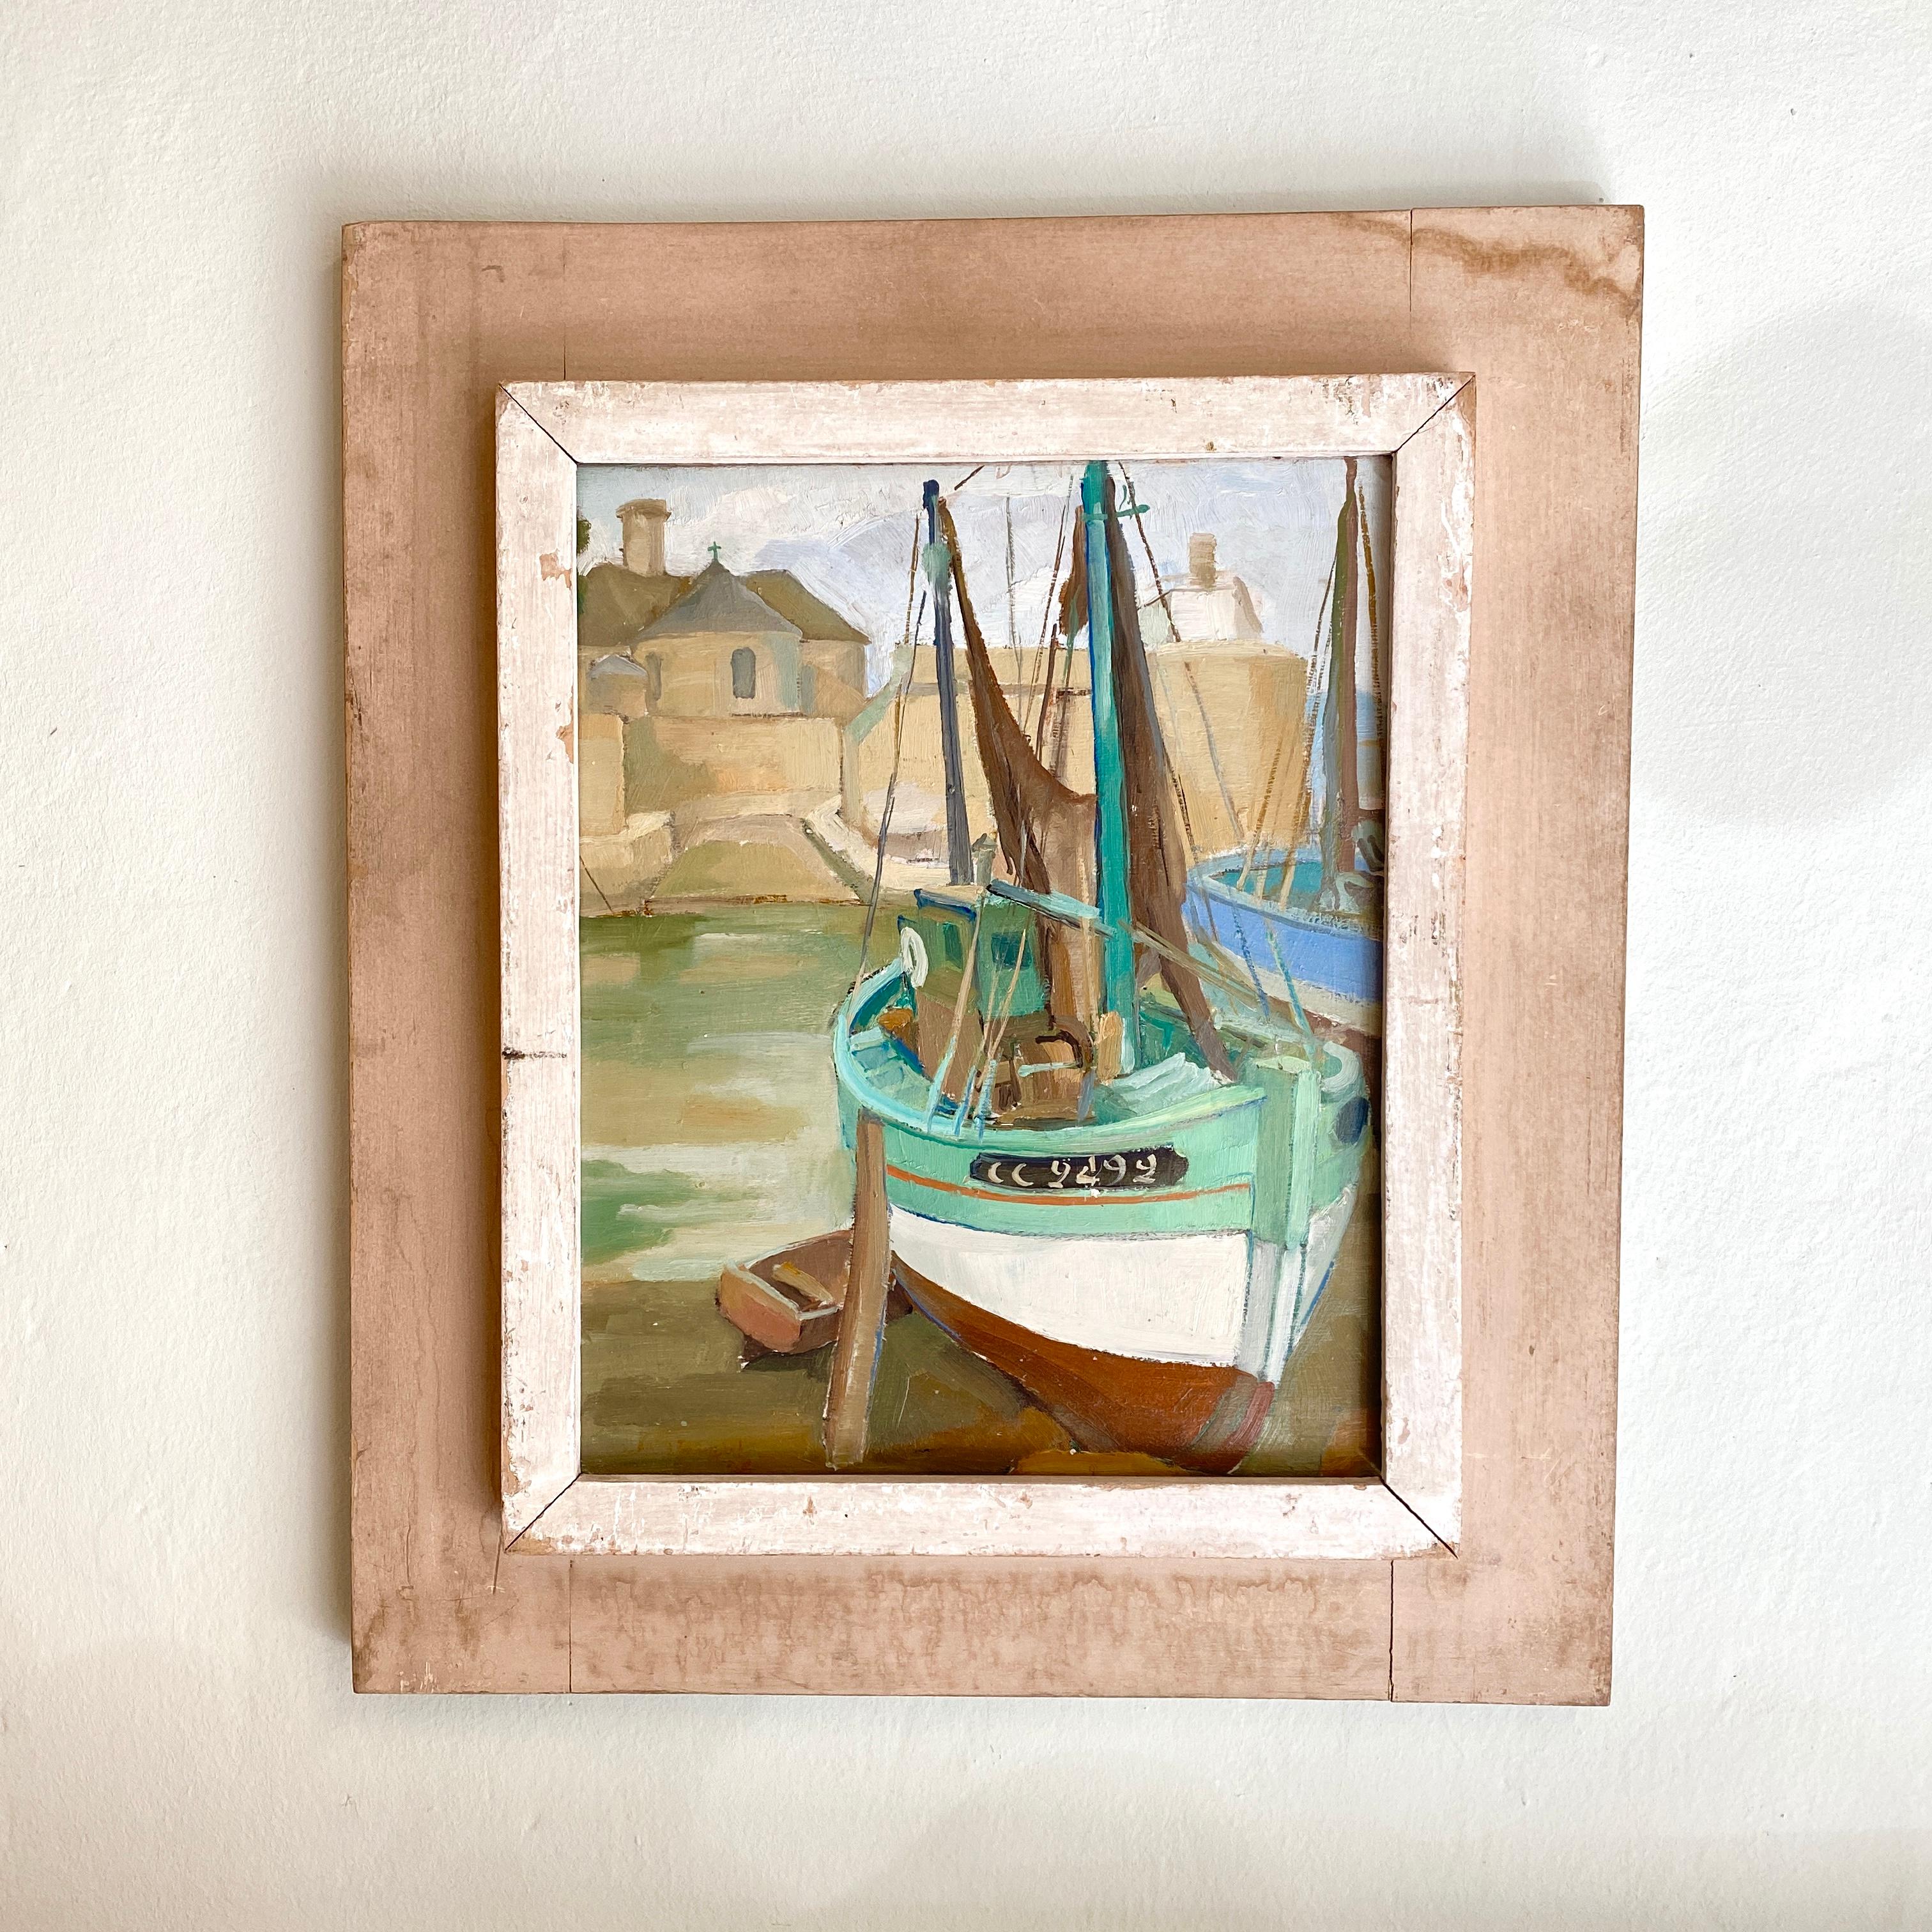 This 1940s oil painting was painted on wood. The Paintings has got very nice colors and a great depth. The painting without the frame is: 31cm x 40cm.
A very nice painting to decorate a modern, antique or midcentury interior.